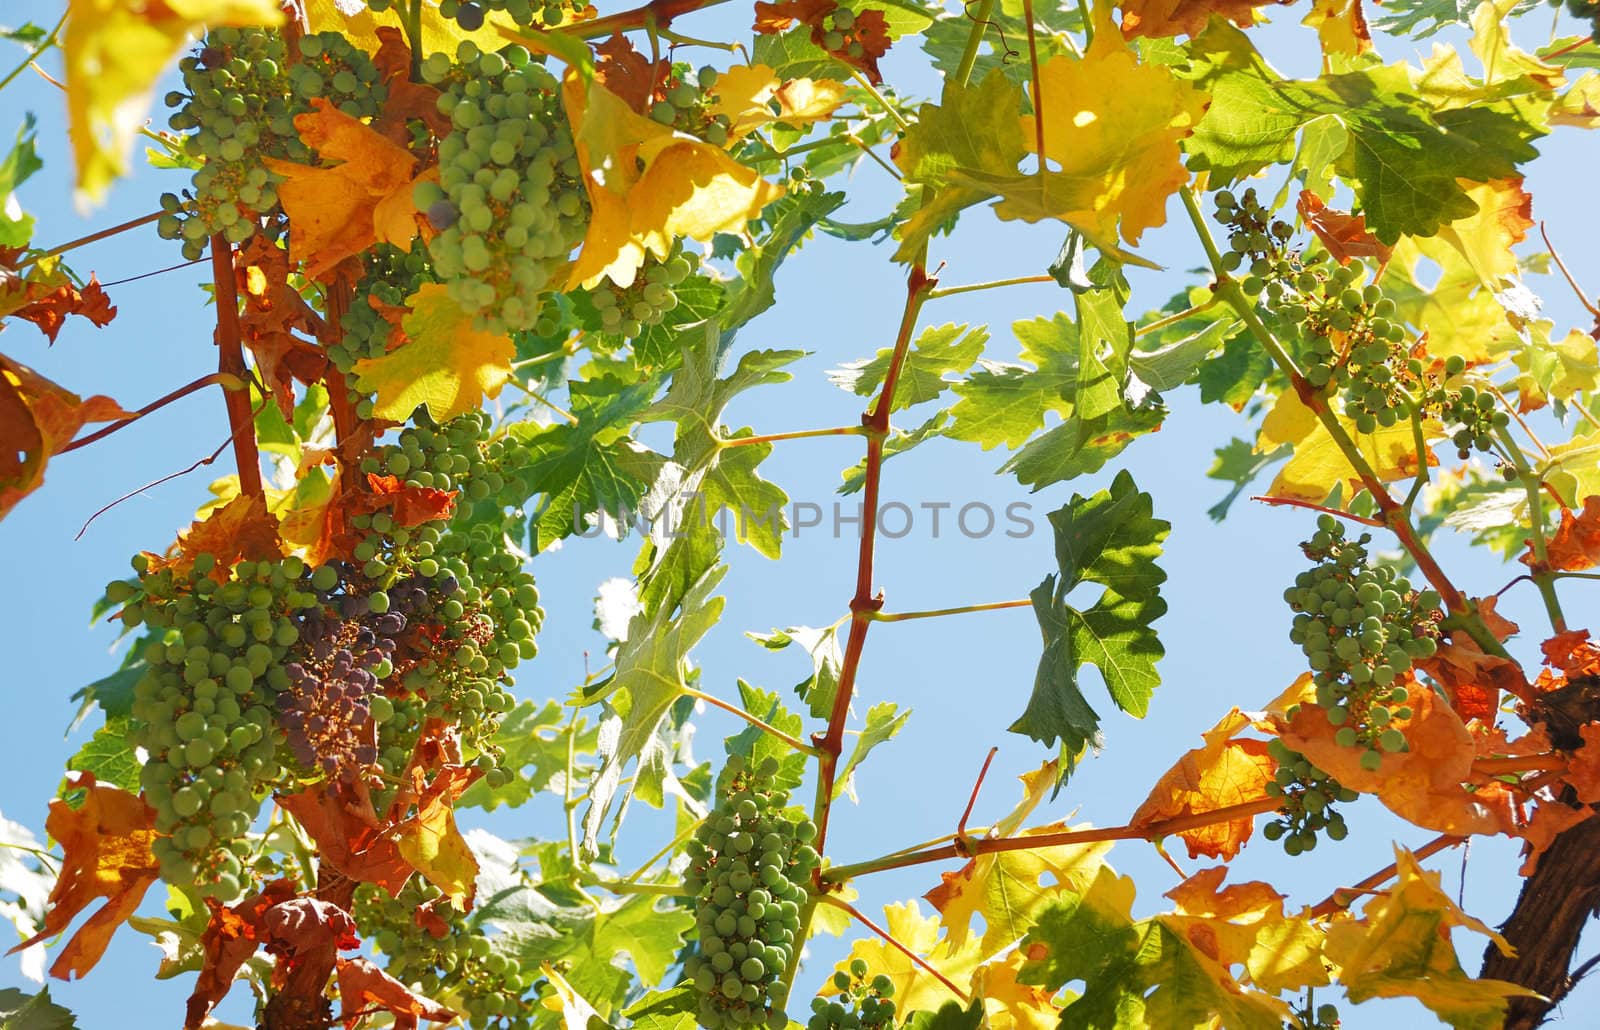 Black and white grapes shown hanging from above against the blue sky.